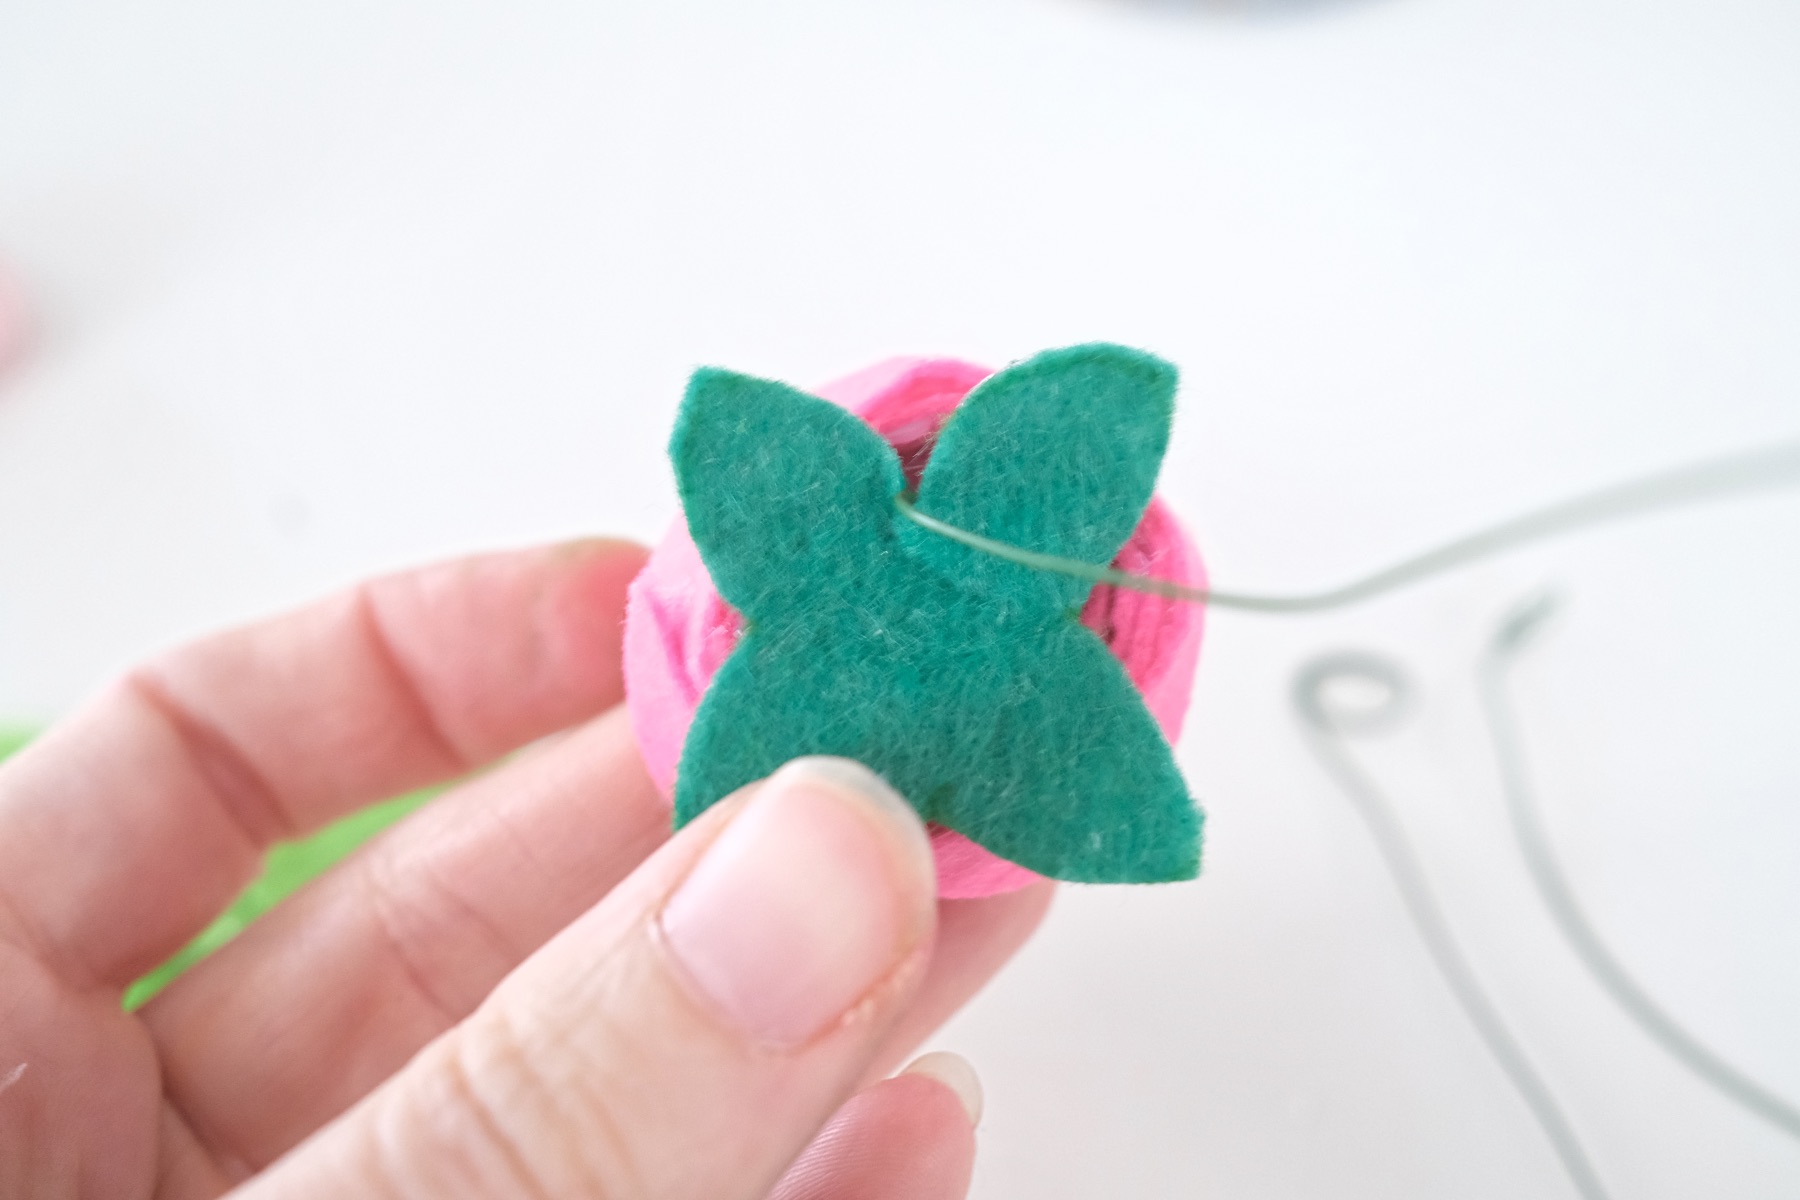 attach the leaves to the bottom of the felt flower